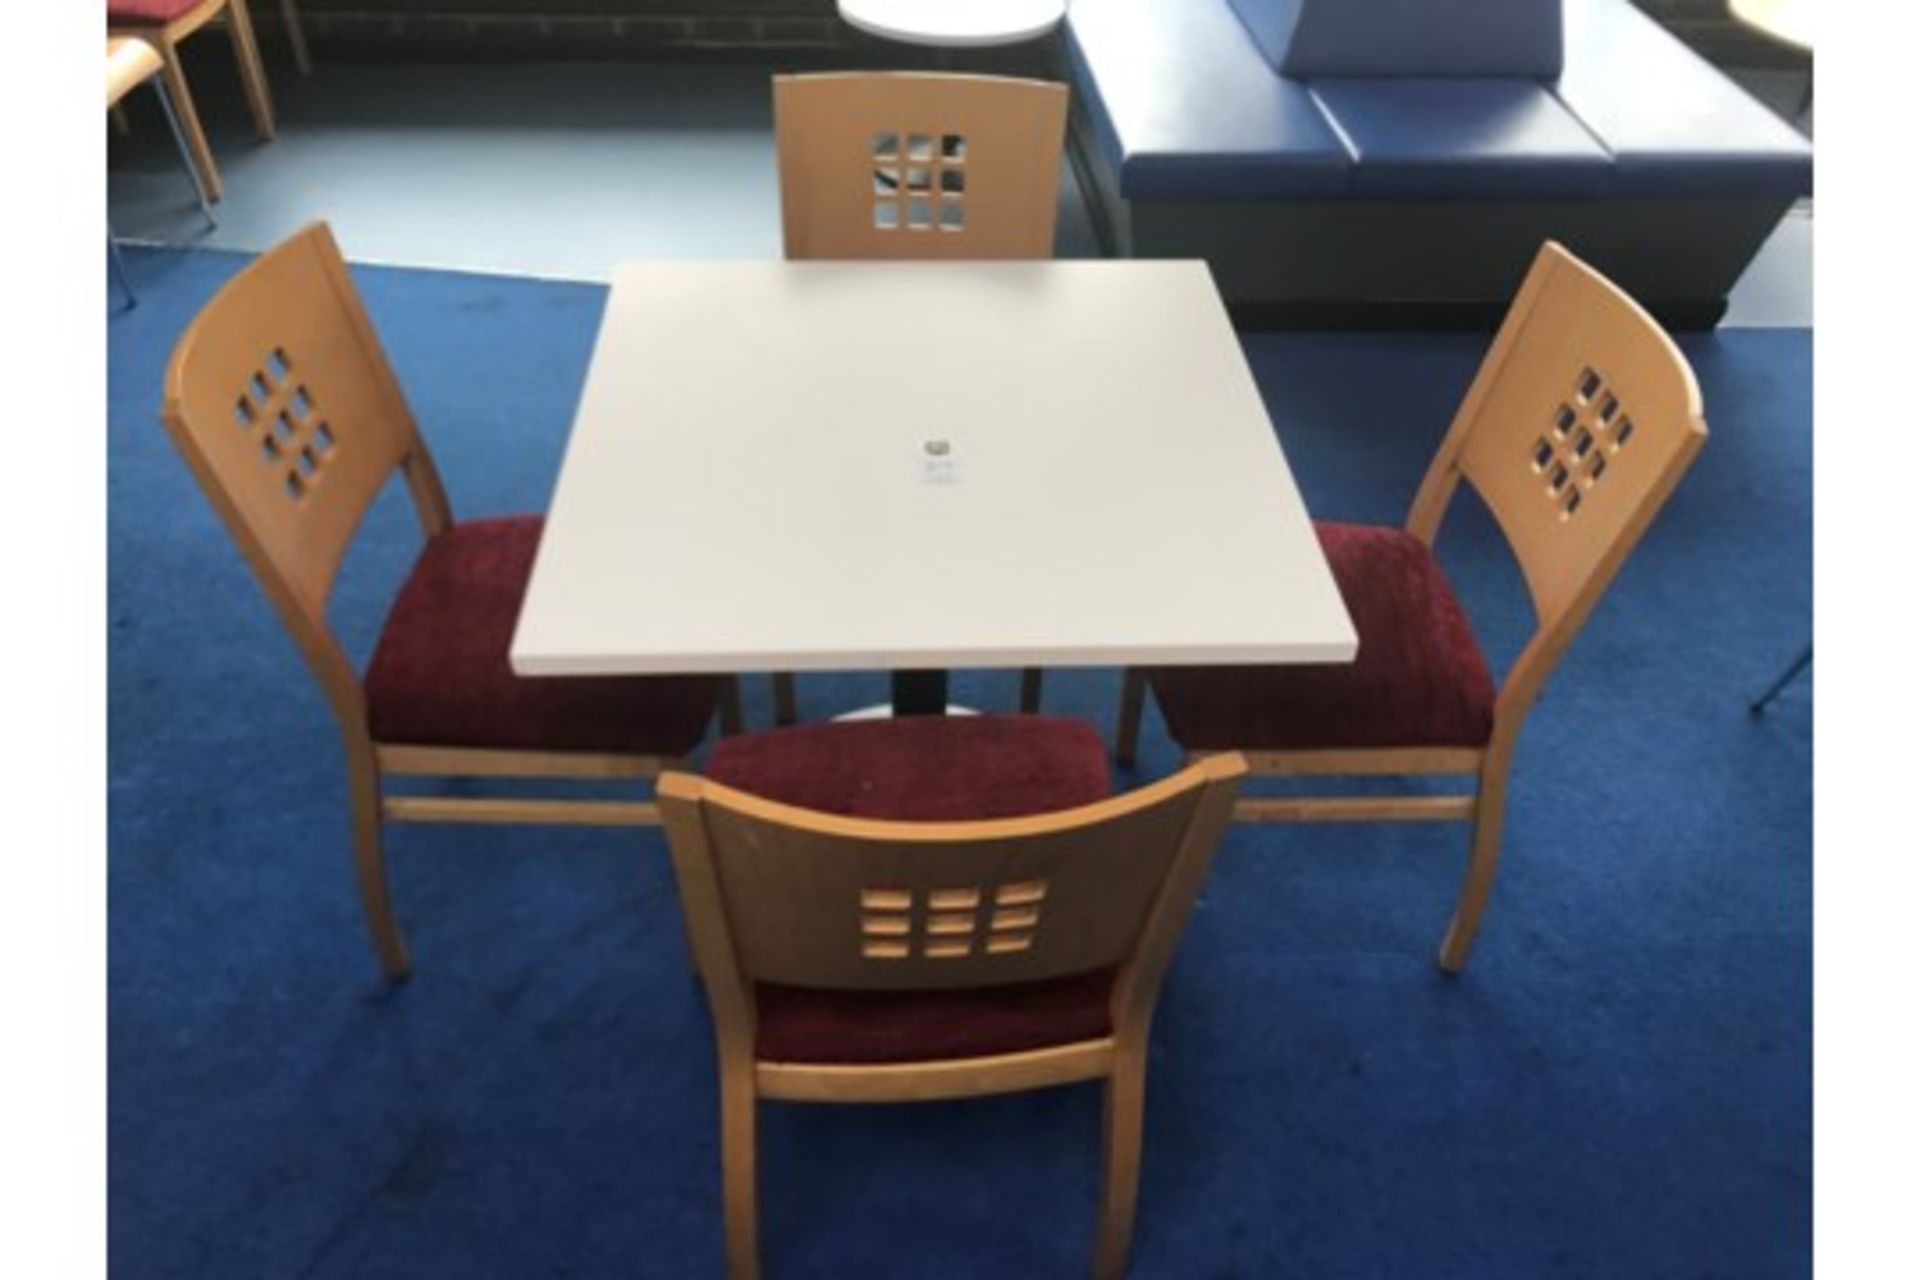 Cafe Table With 4 Chairs